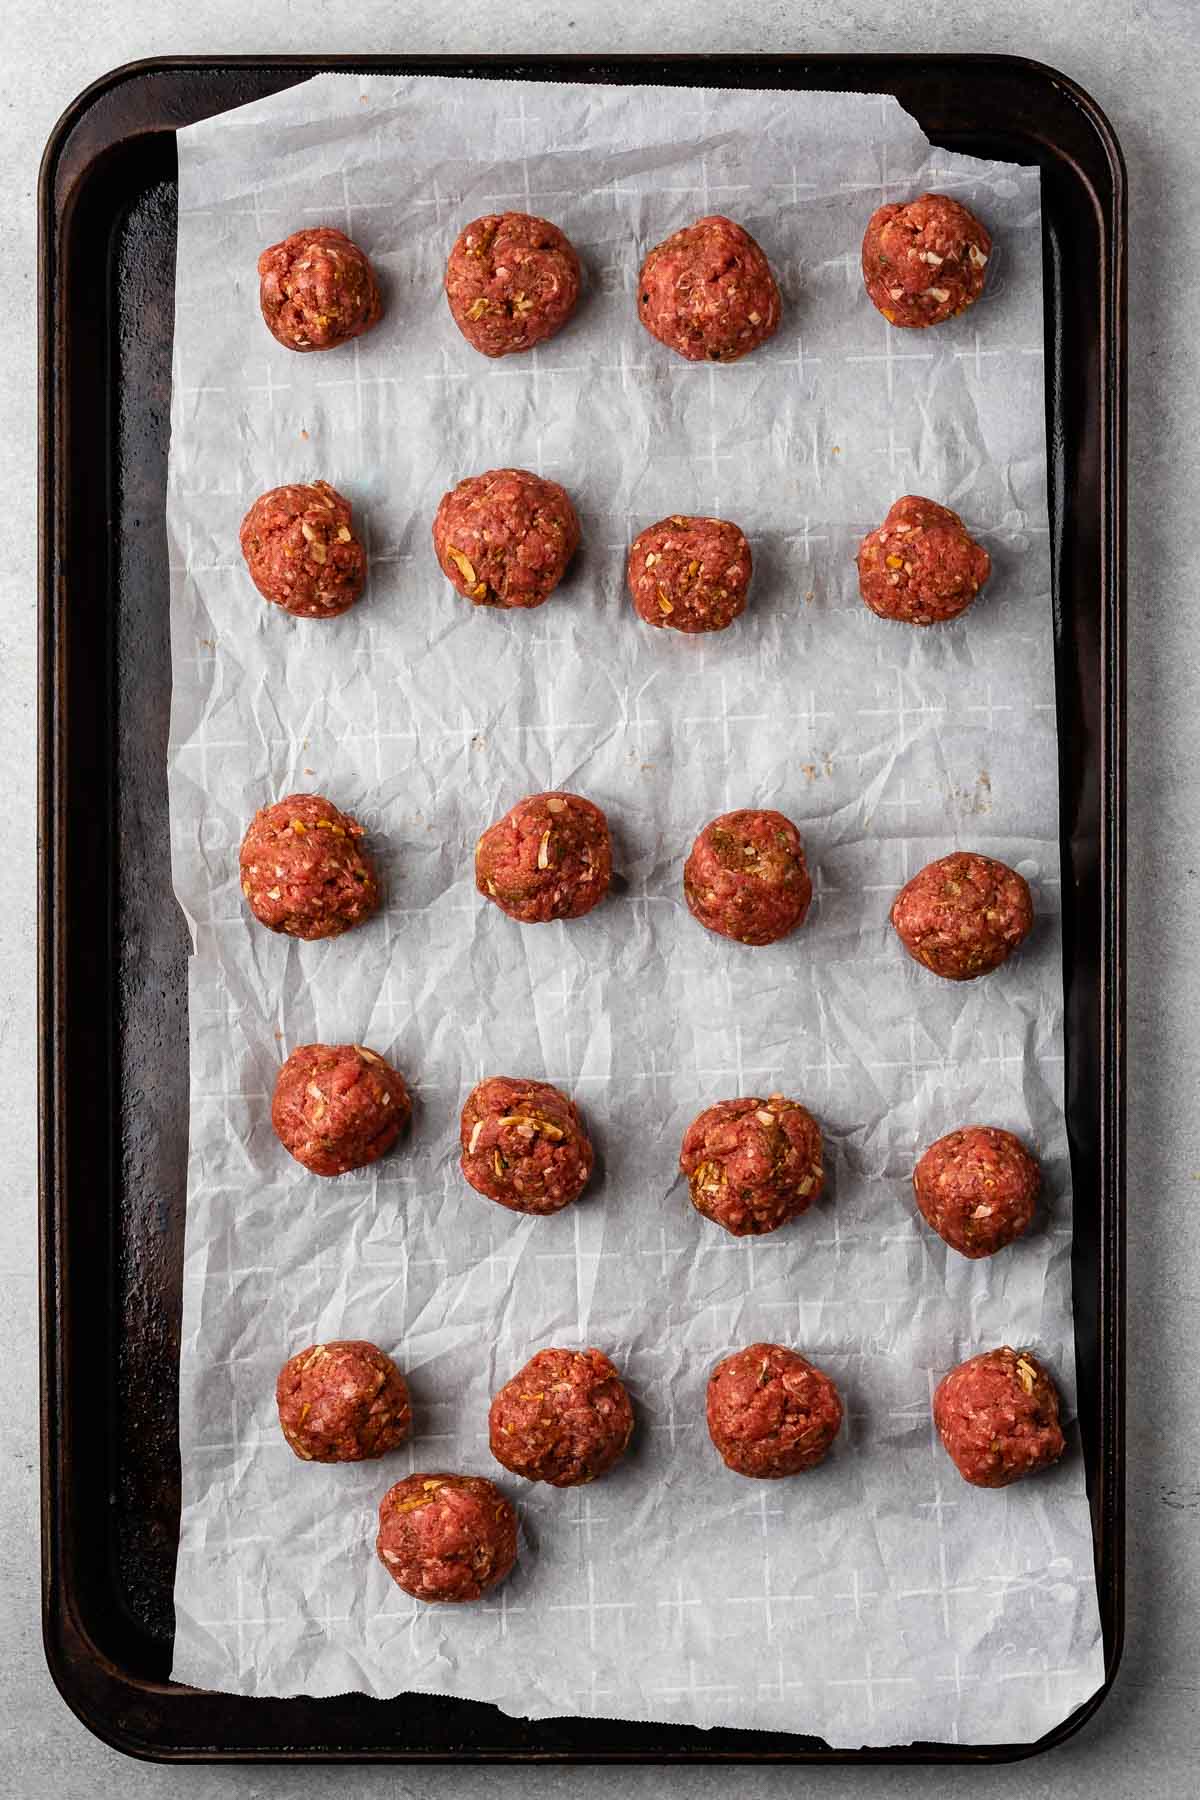 meatballs before being cooked on a pan with parchment paper